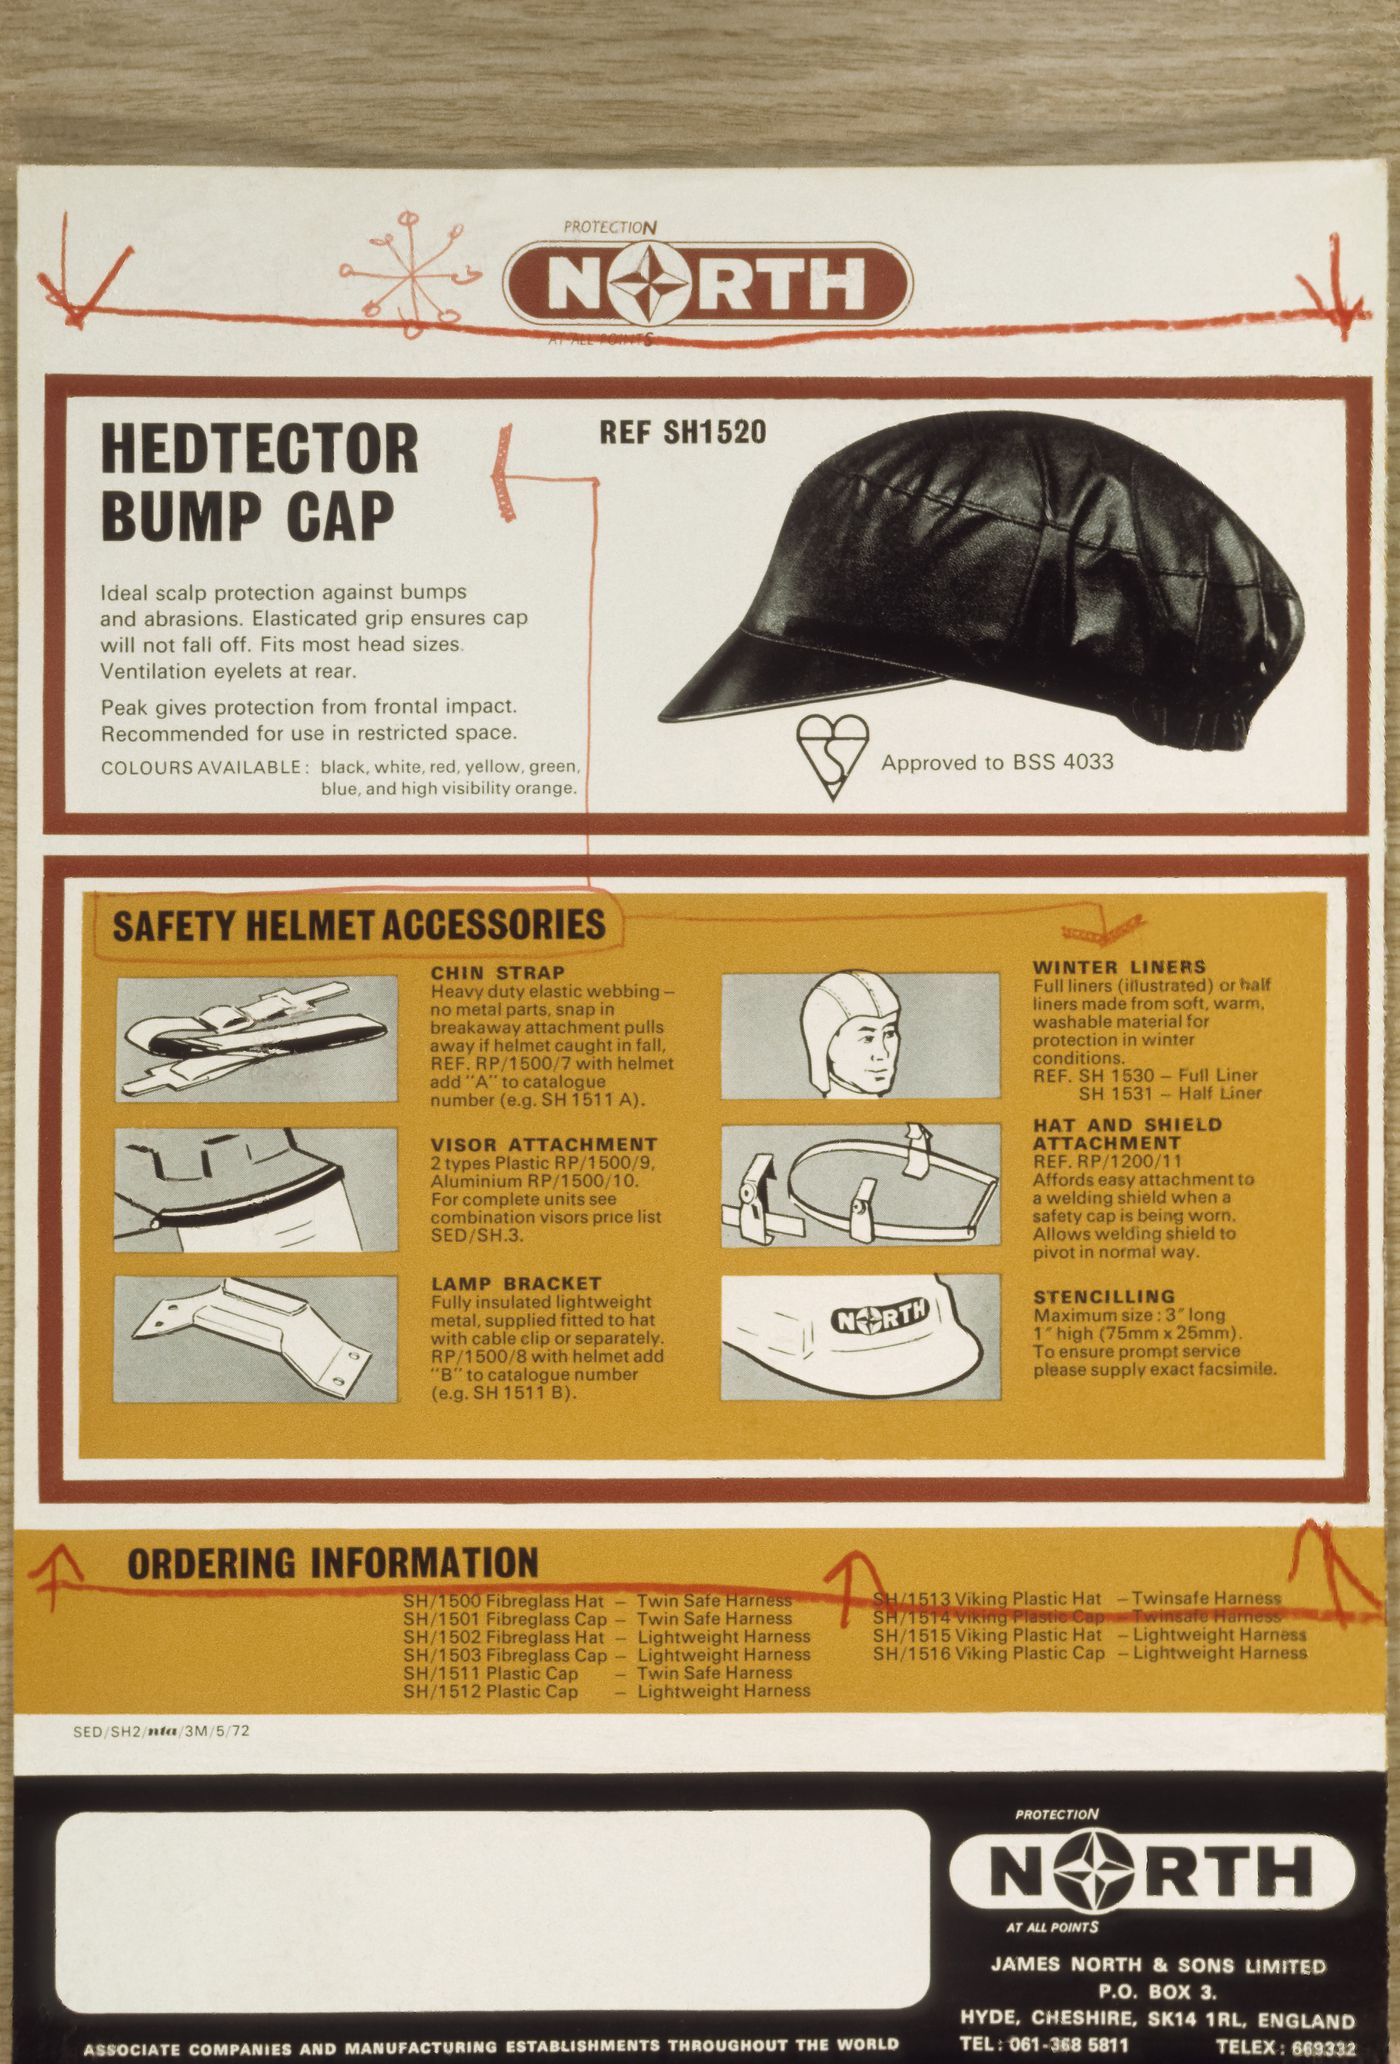 View of an advertisement for the "Headtector Bump Cap" and safety helmet accessories